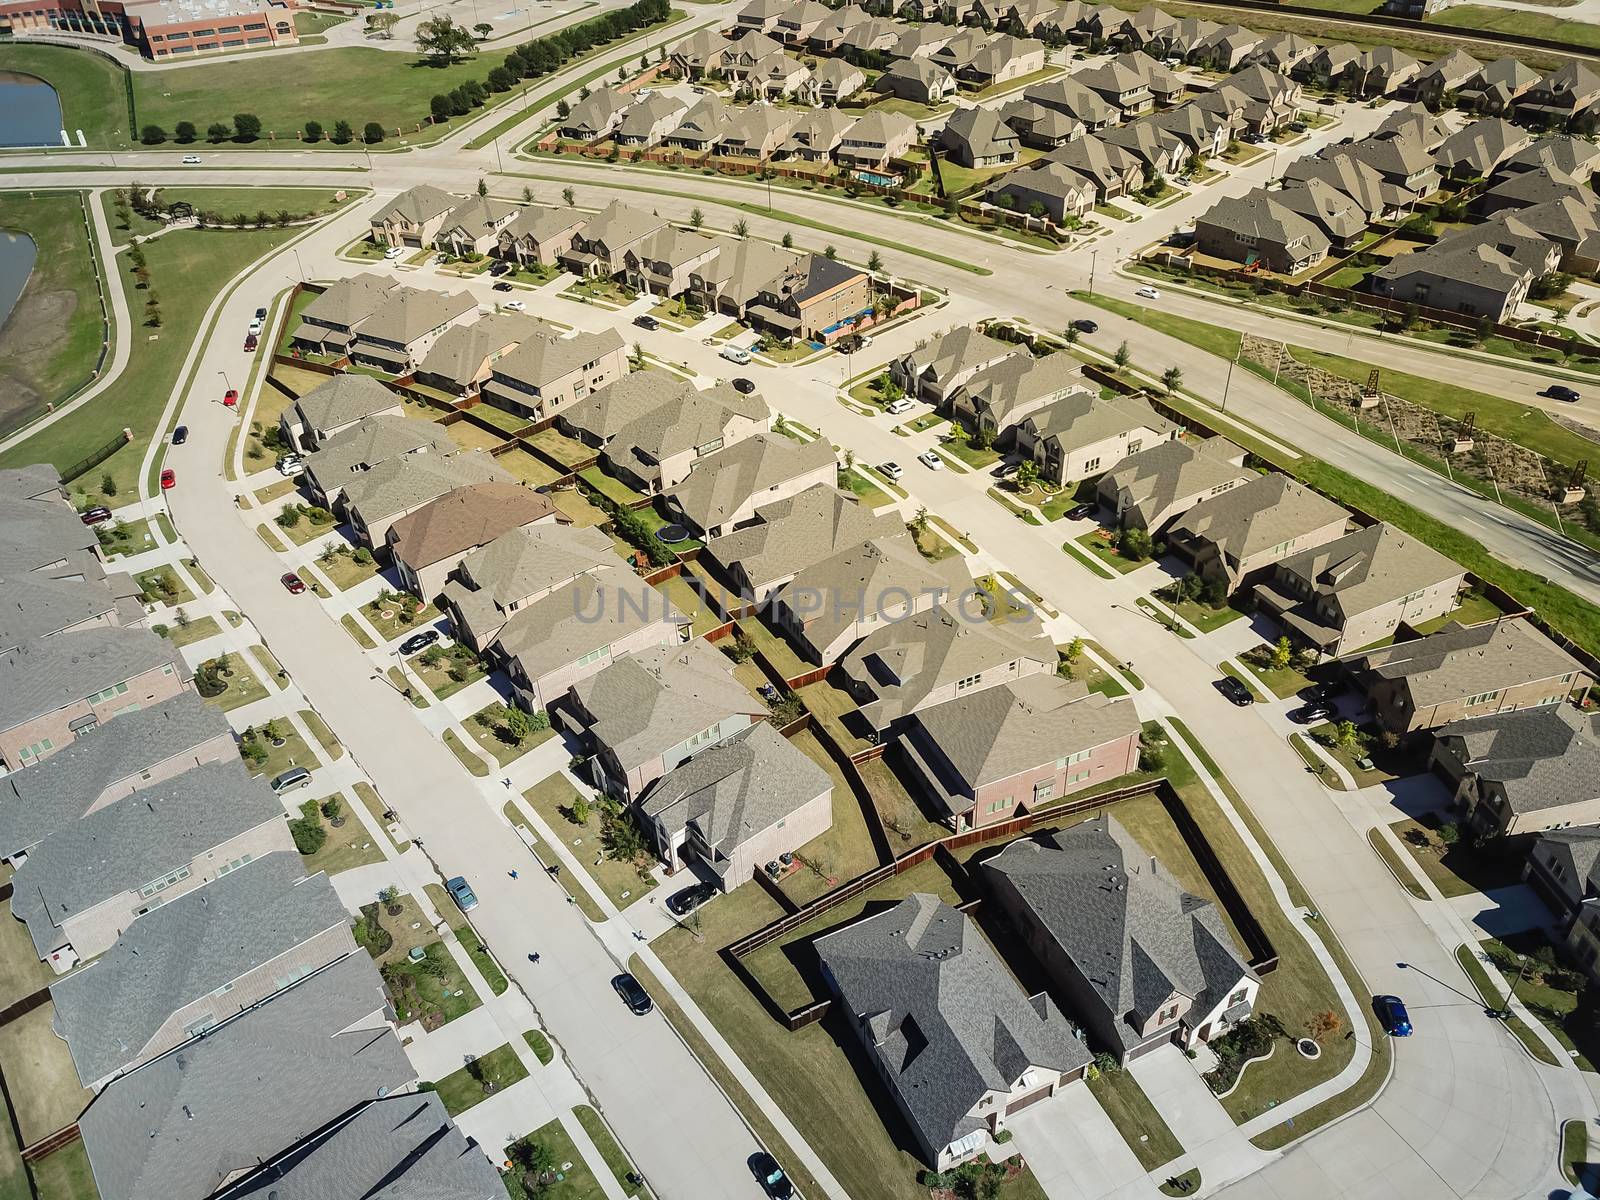 Aerial view new residential area near school district in North Dallas, Texas, USA. Flyover row of brand new single-family houses with gardens